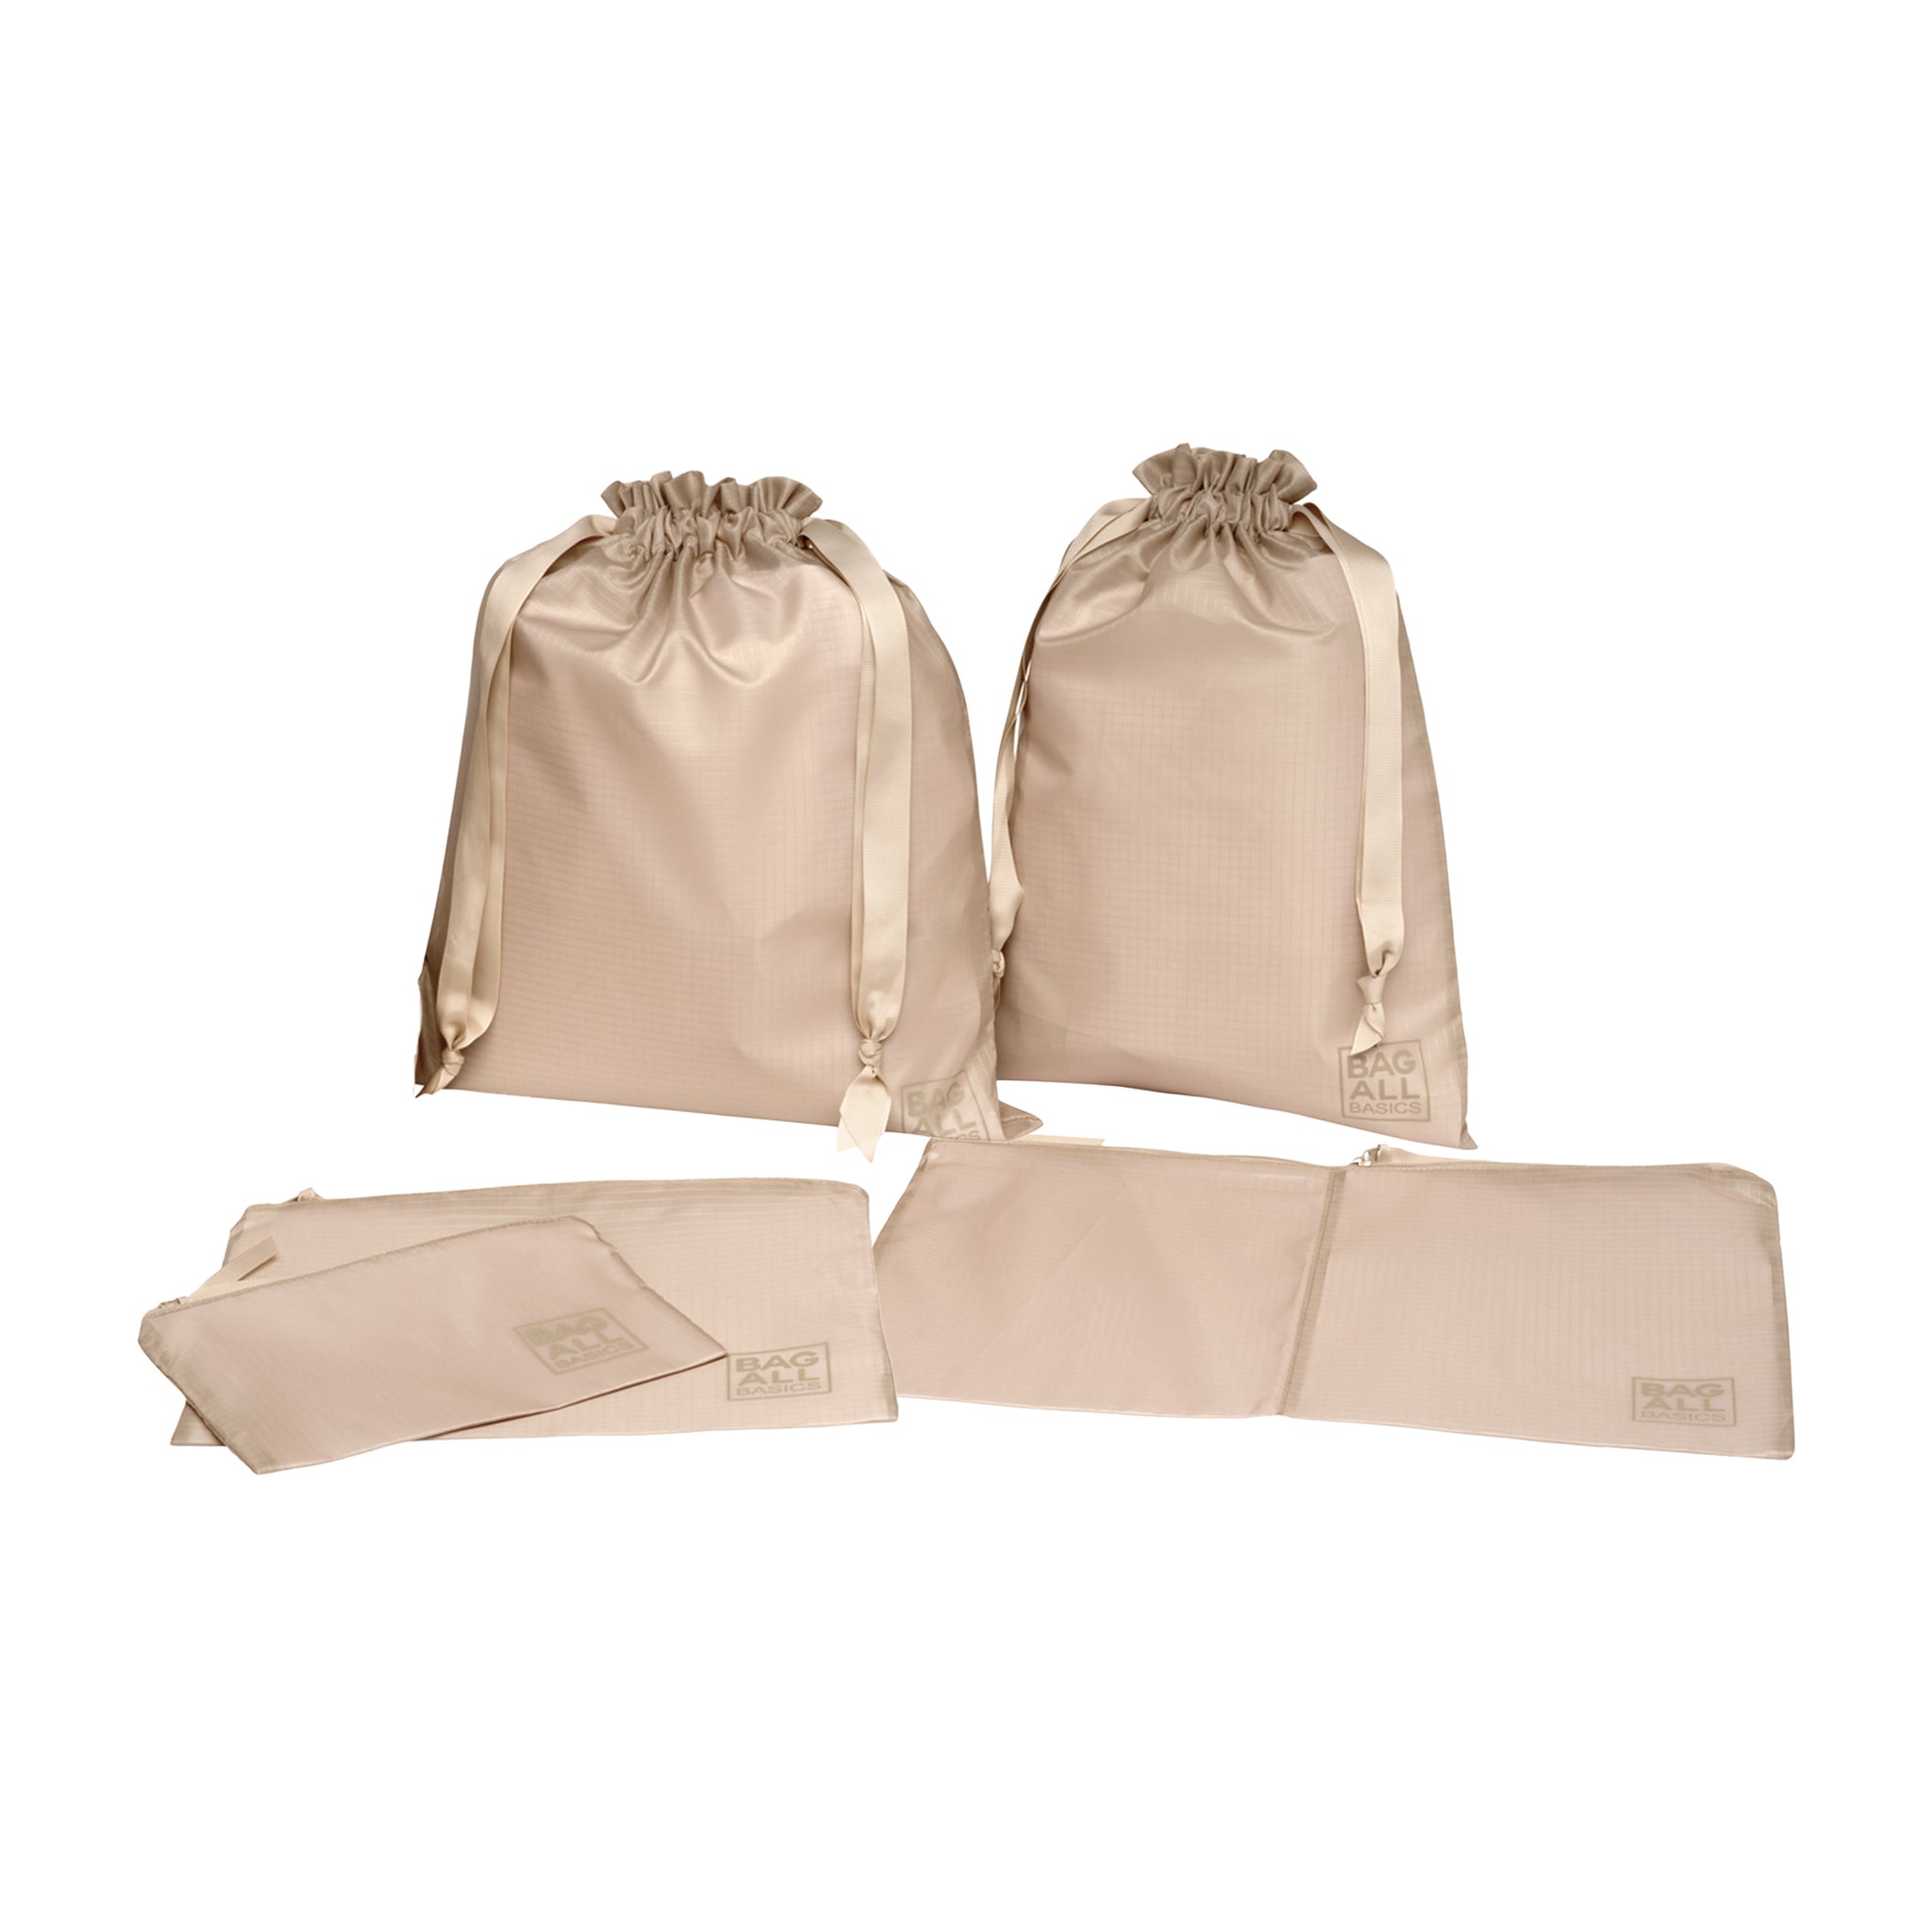 Bag-all Basic Packing Bags Set, 5-pack, Taupe - Bag-all